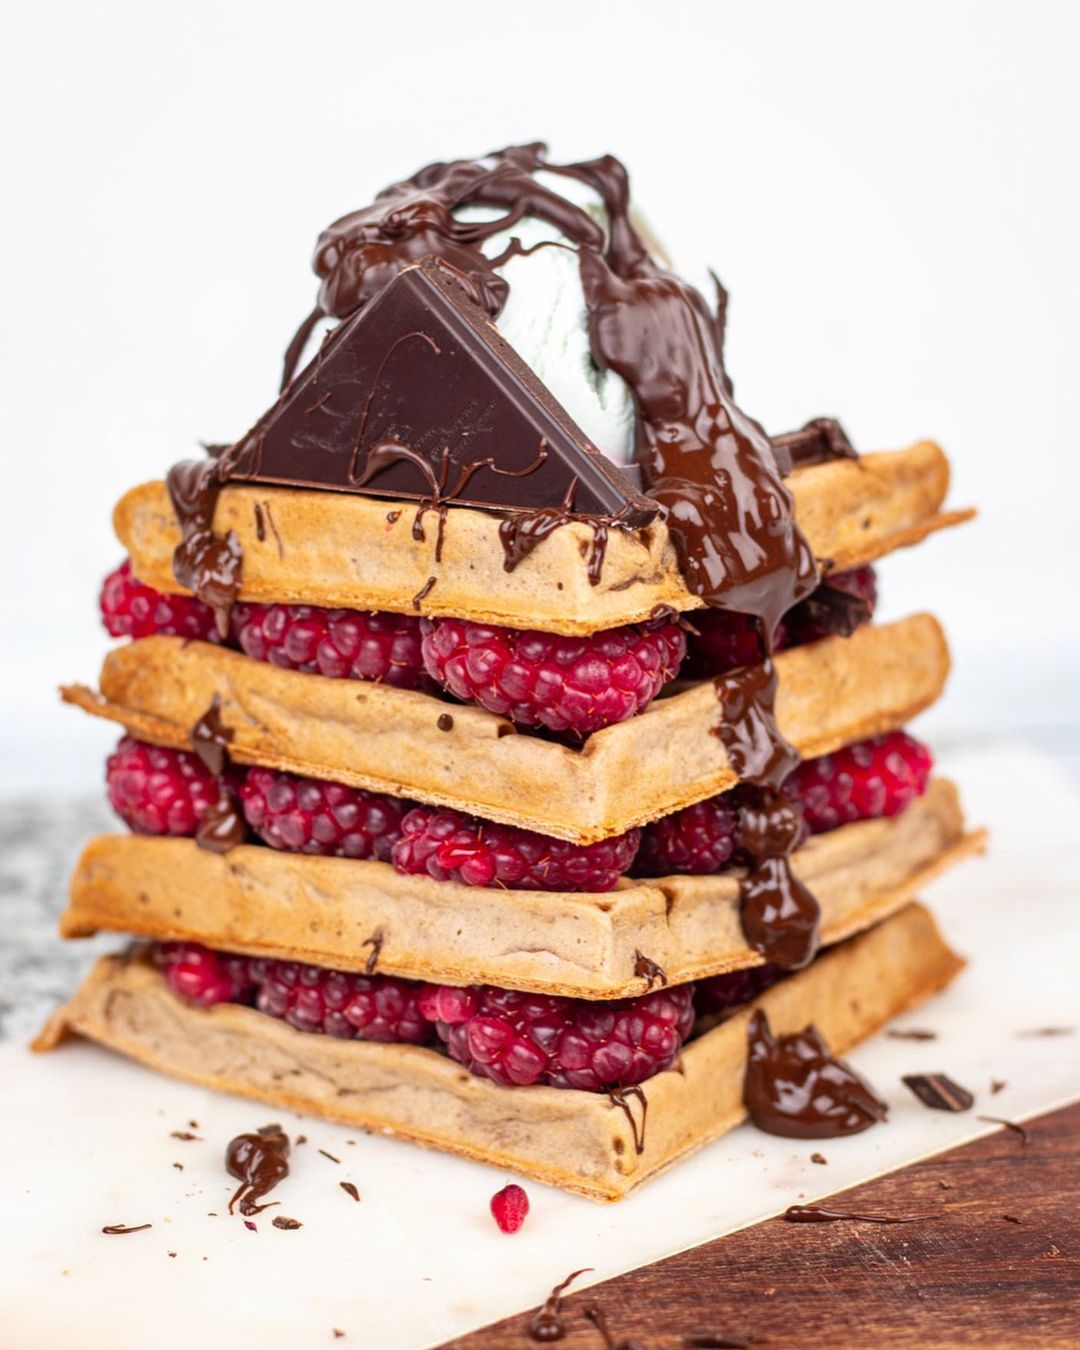 Protein Waffle